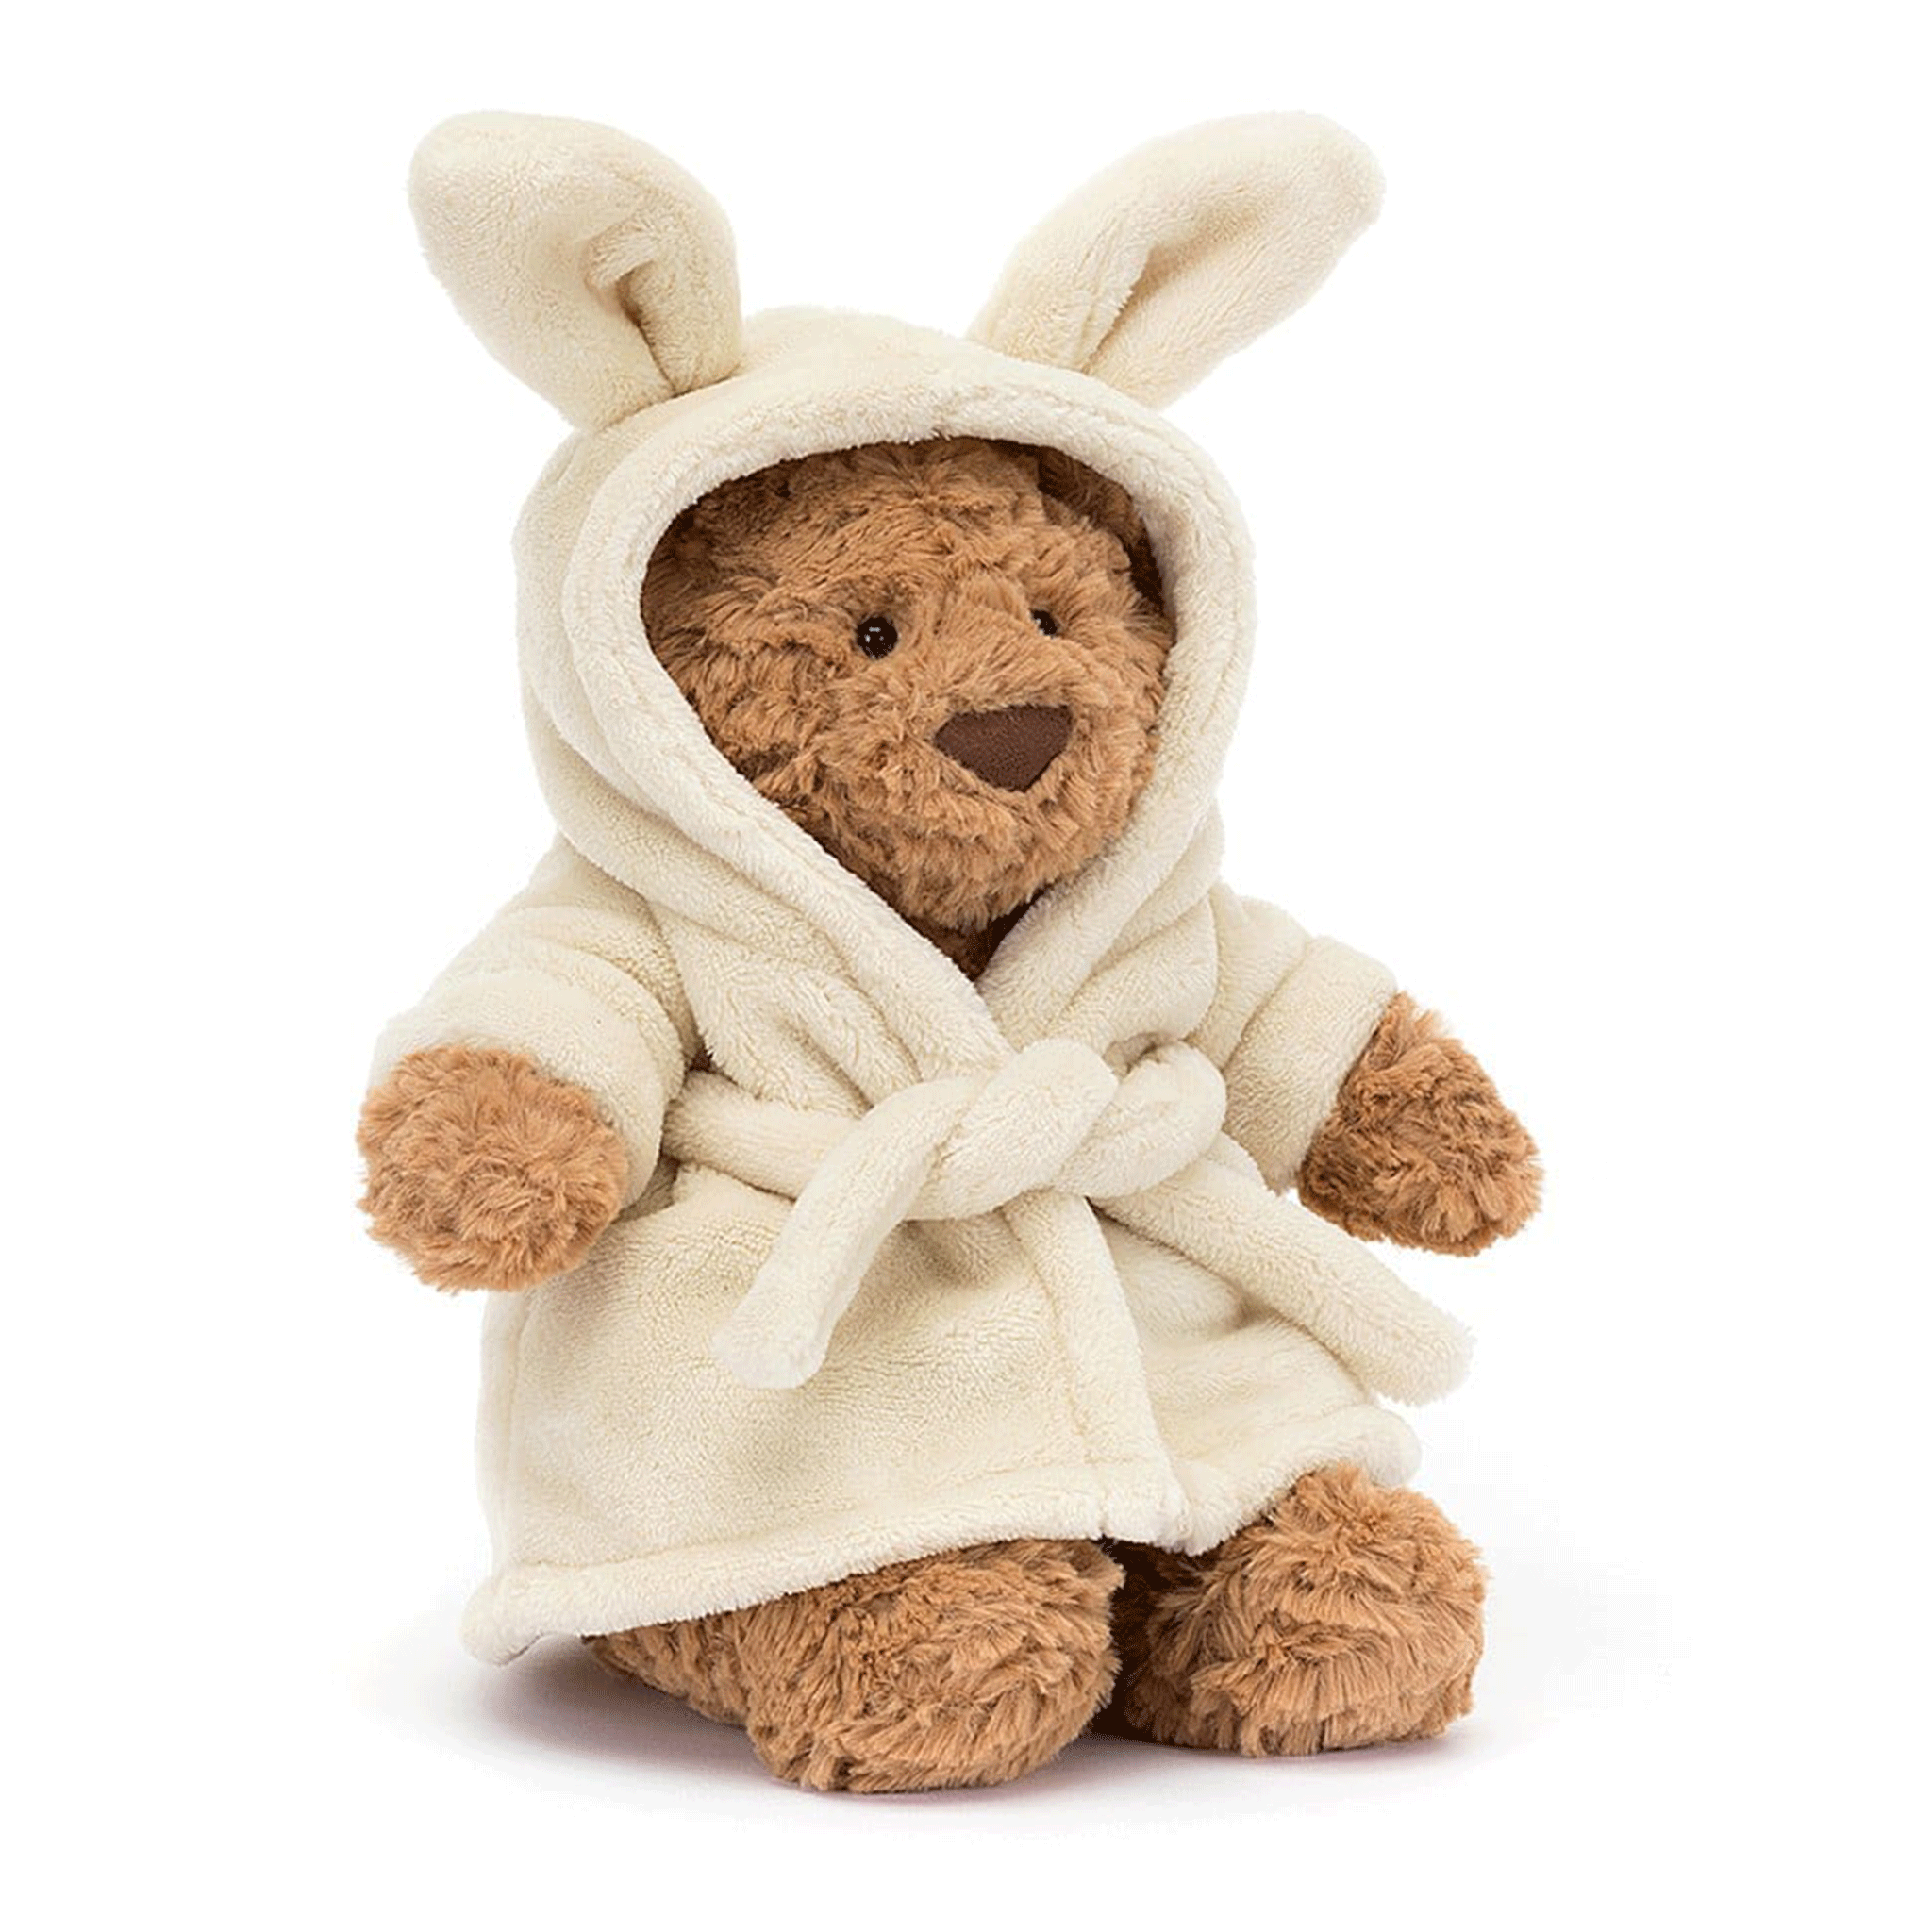 On a white background is a brown stuffed animal bear wearing a fuzzy white rope with bunny ears. 